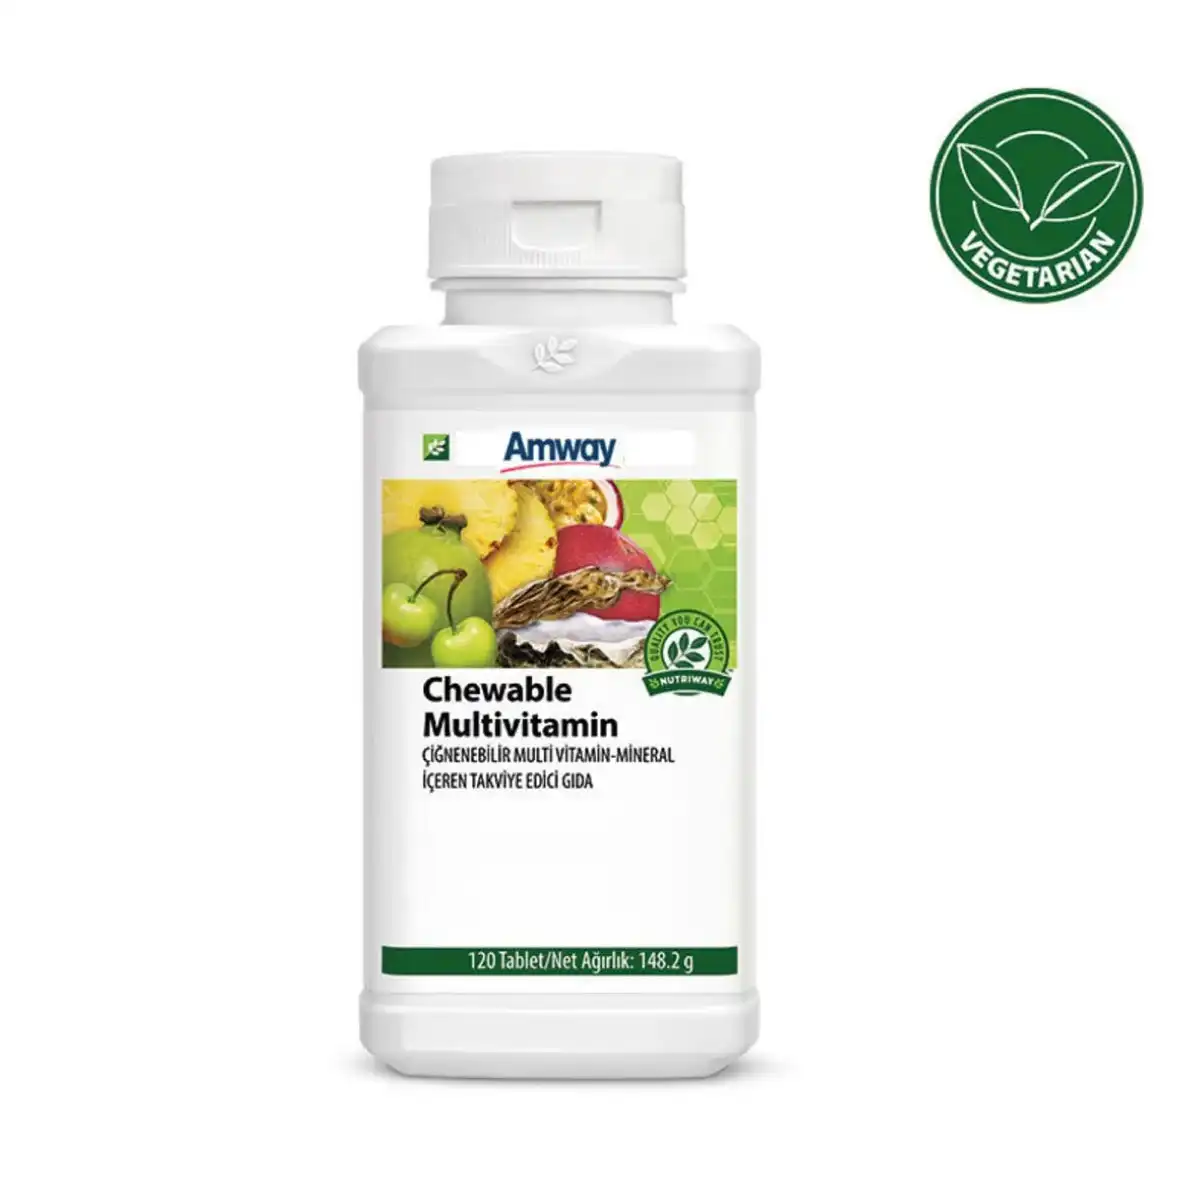 Amway Nutriway Chewable Multivitamin